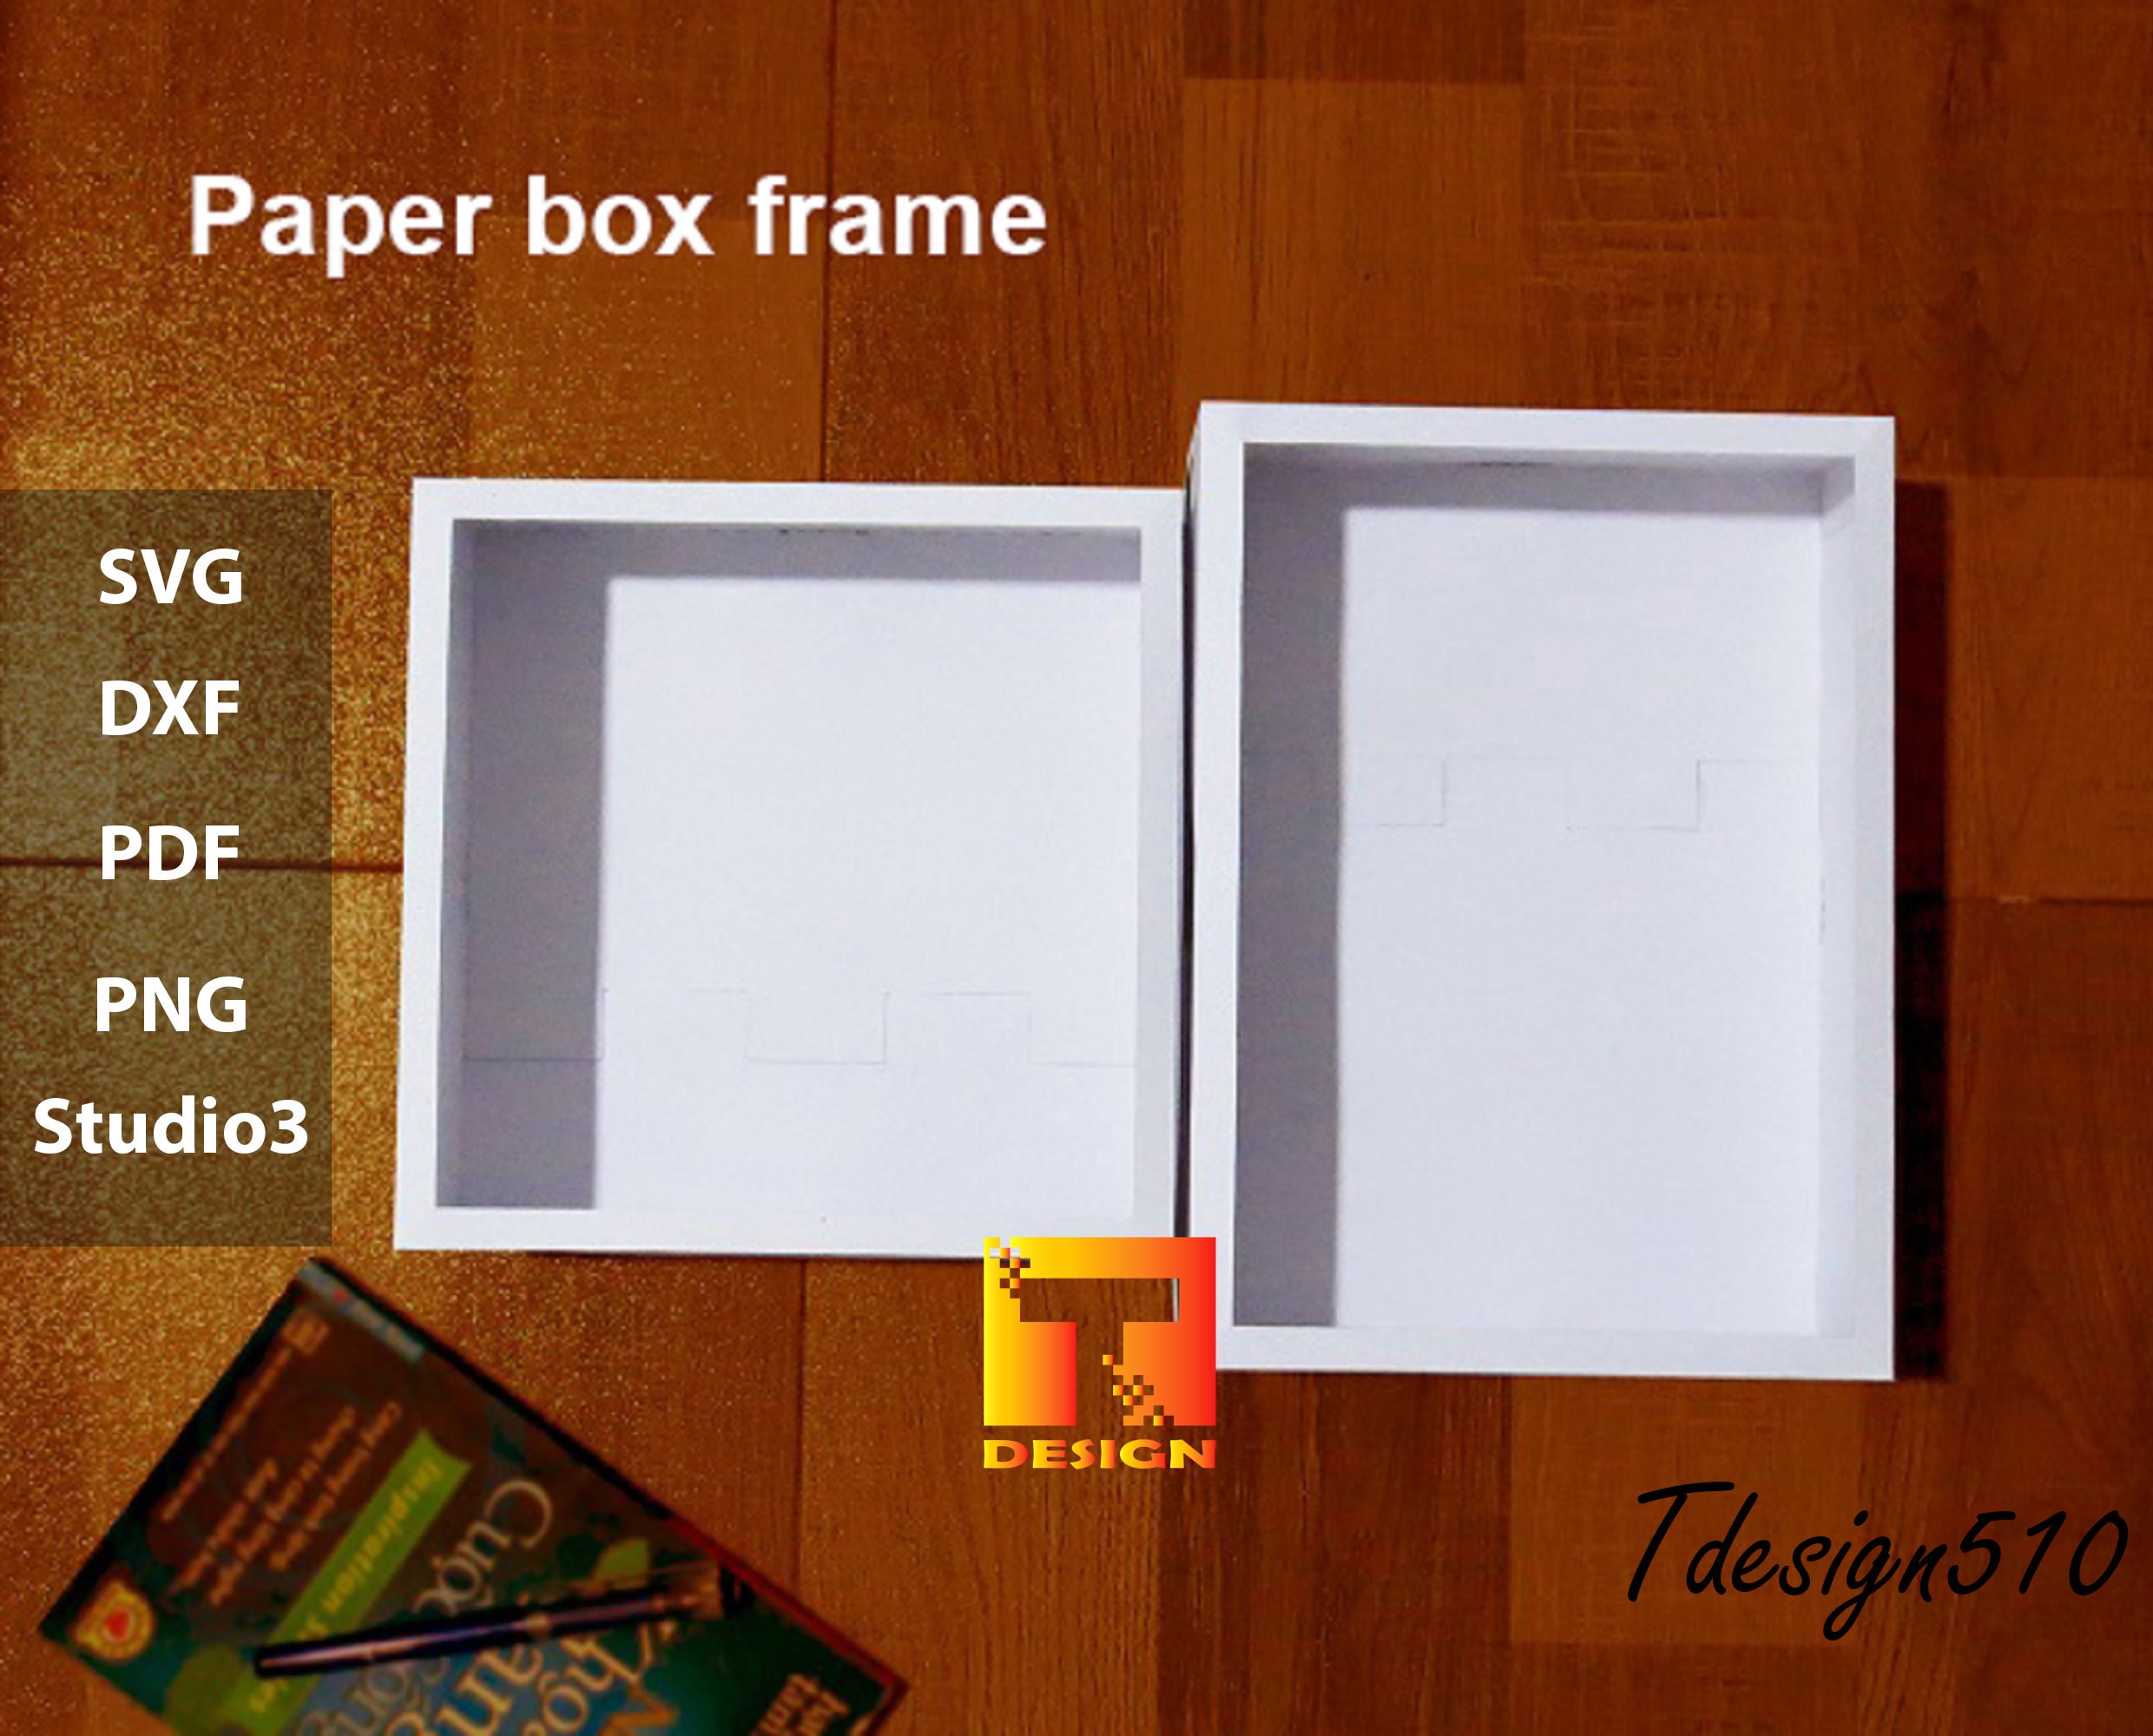 DIY picture frame with paper 